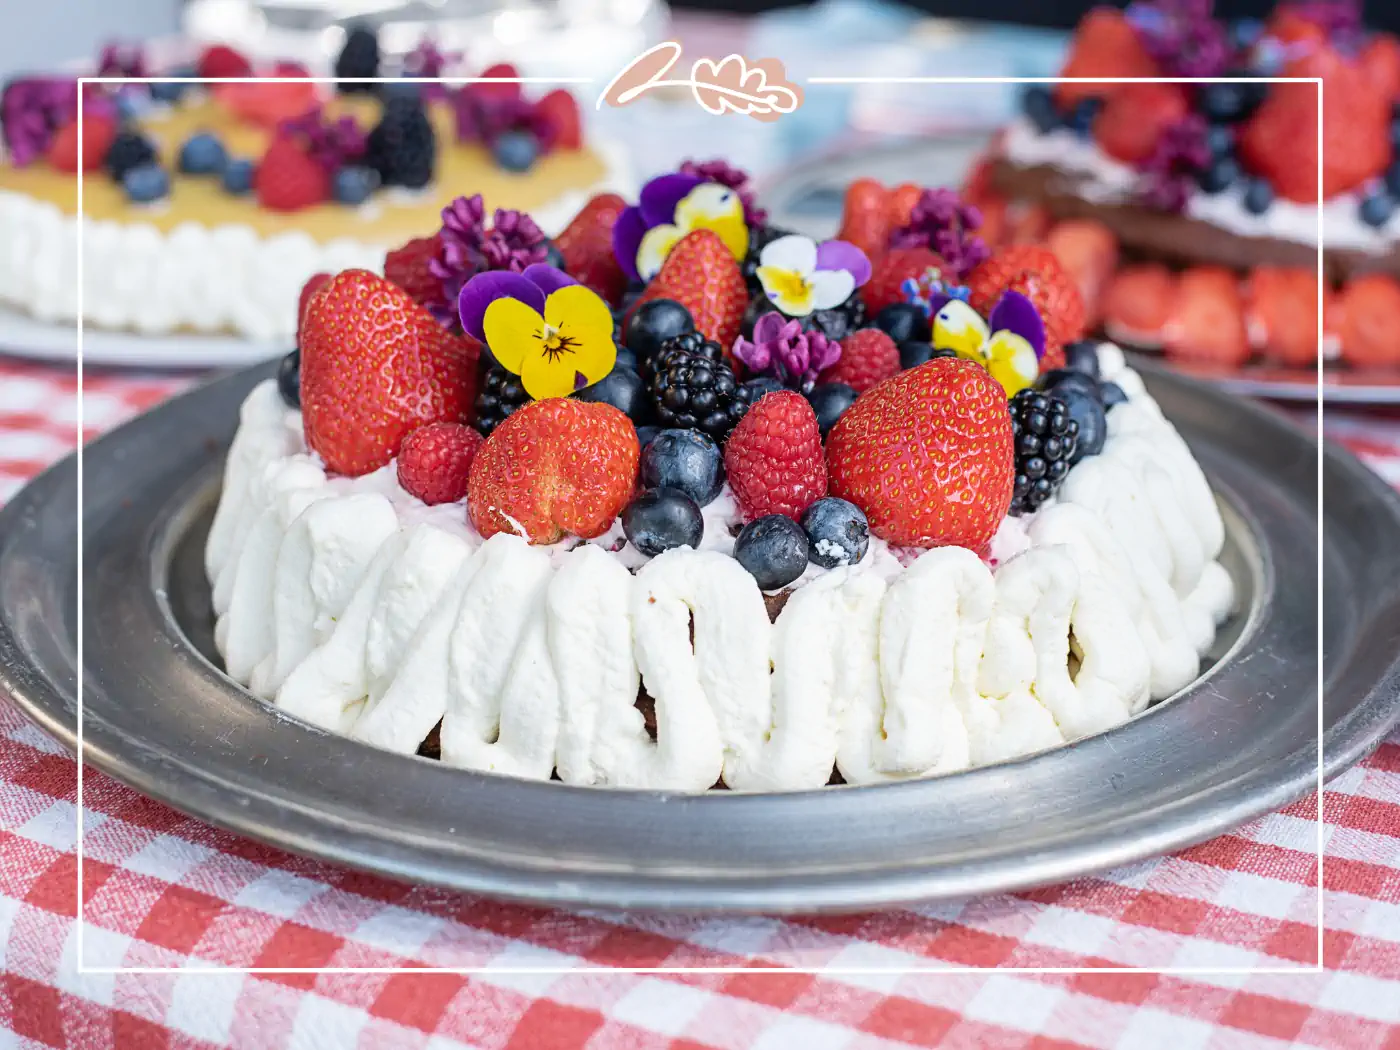 Fruit and berry cake decorated with whipped cream and edible flowers. Fabulous Flowers and Gifts.